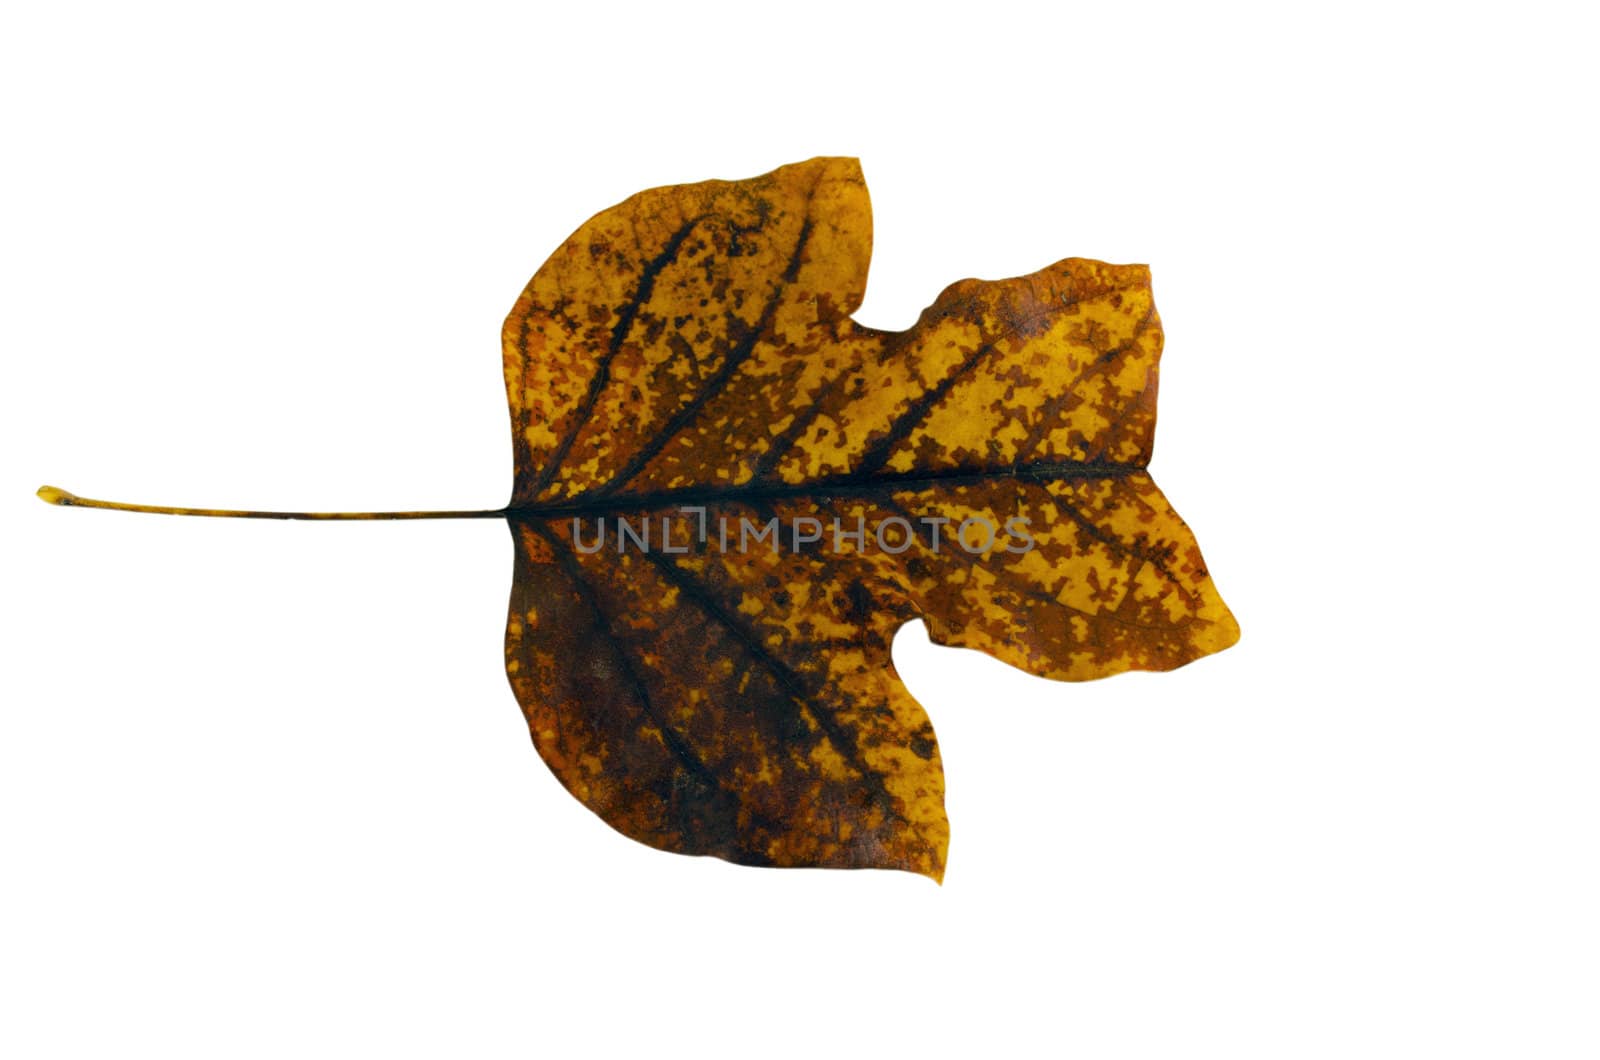 sear tulip tree leaf turned on its side isolated on white background.